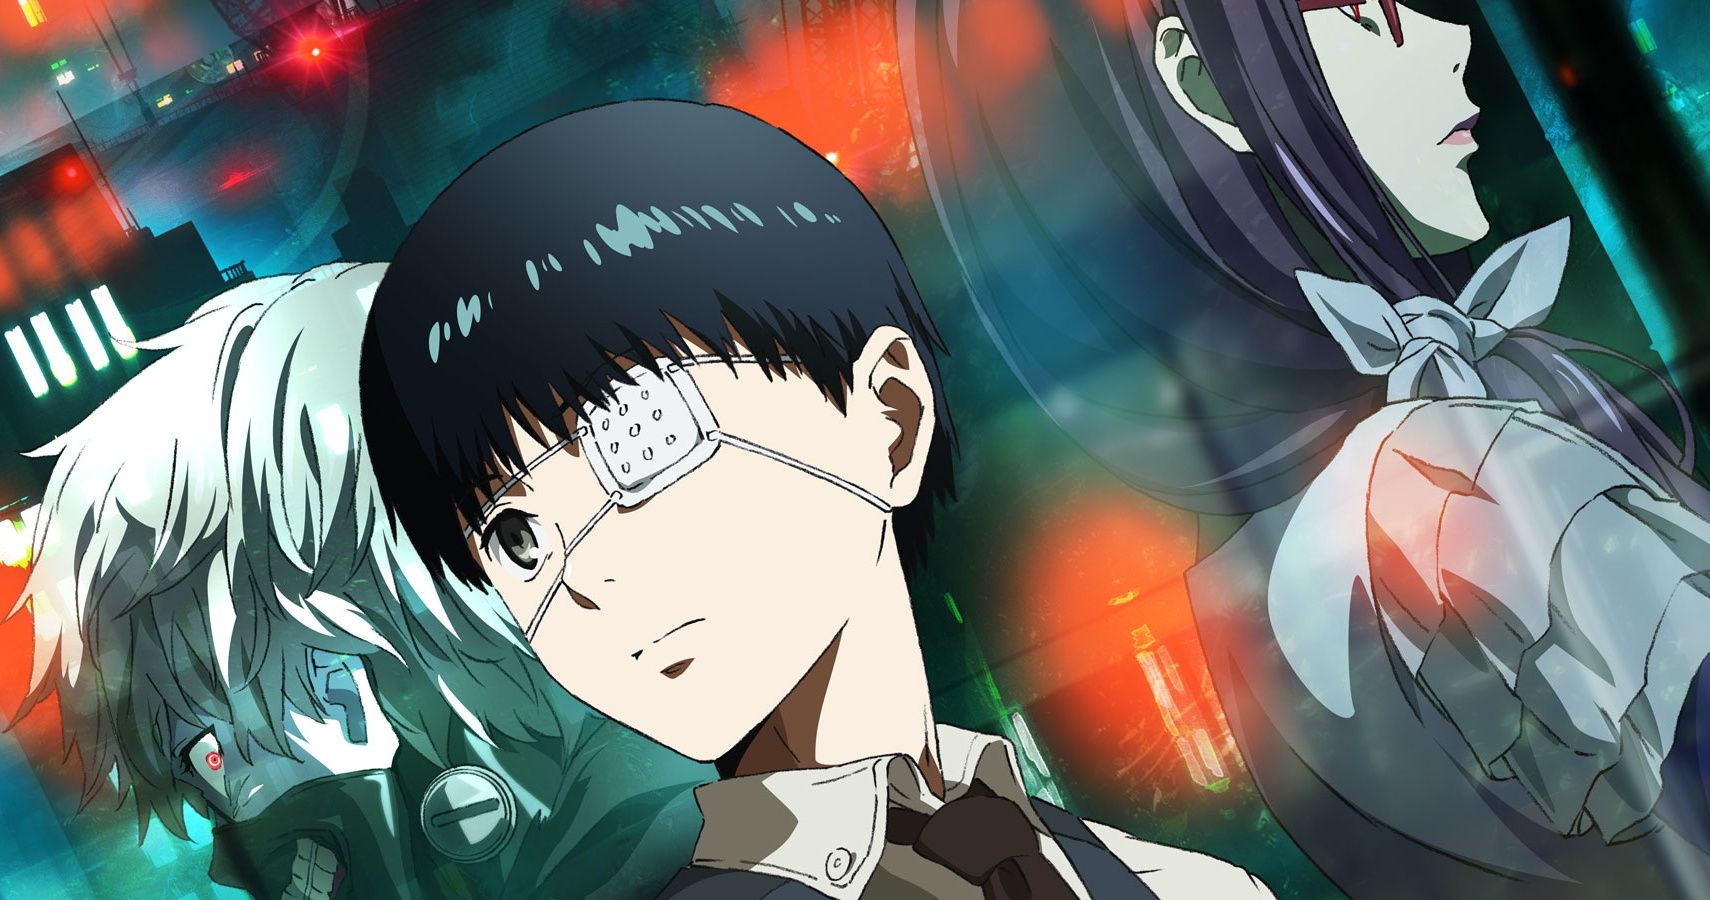 Read a Substantial Amount of Tokyo Ghoul Online – Comics Worth Reading